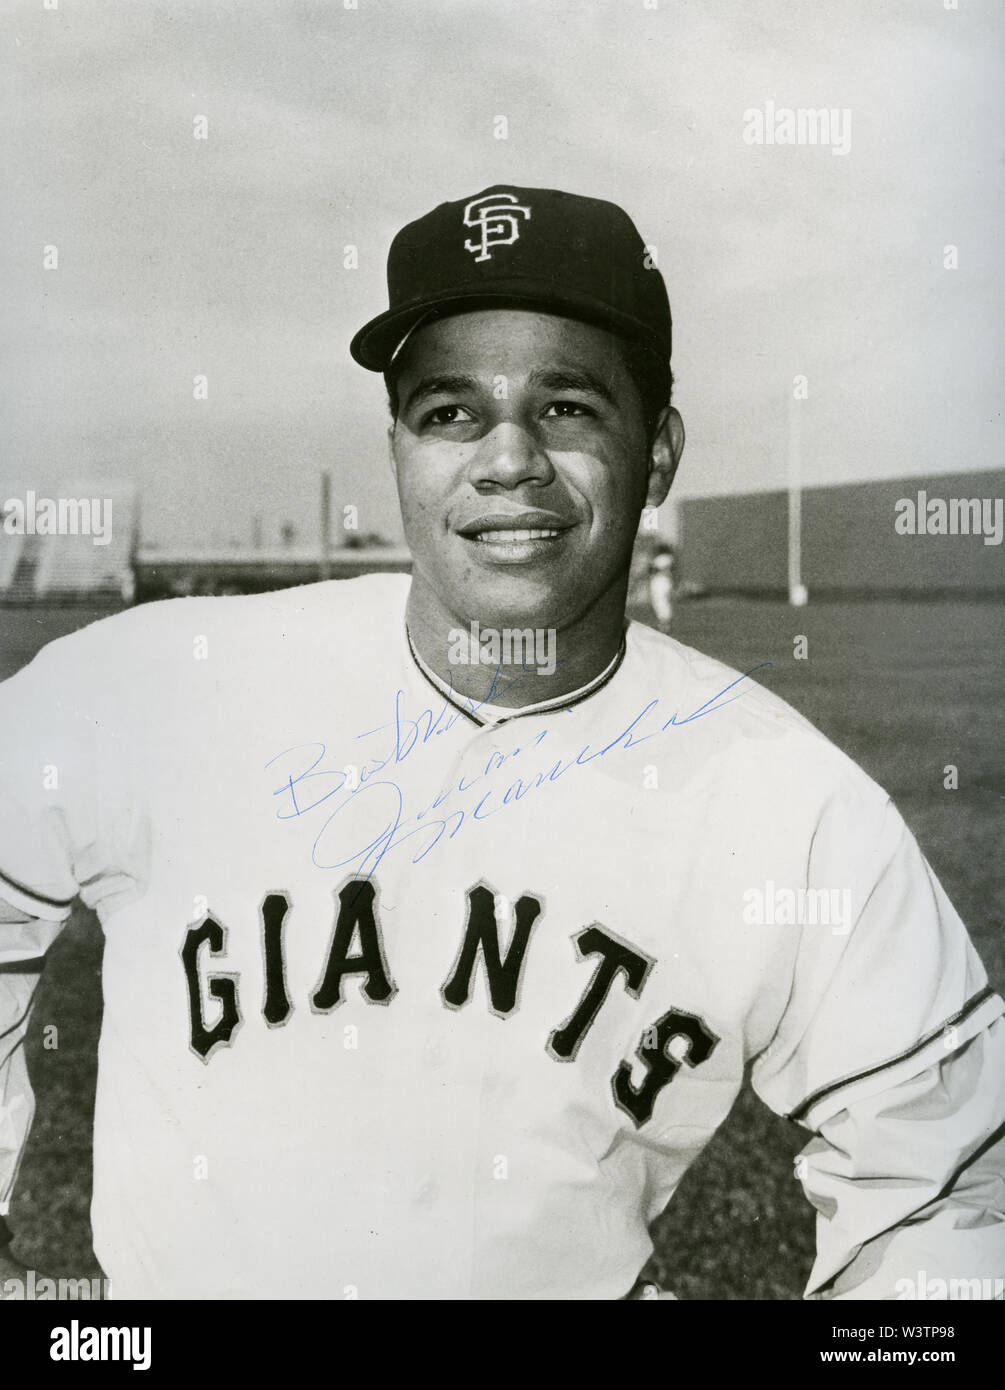 Autographed photo of Juan Marichal star pitcher with the San Francisco Giants baseball team in the 1960s. Stock Photo